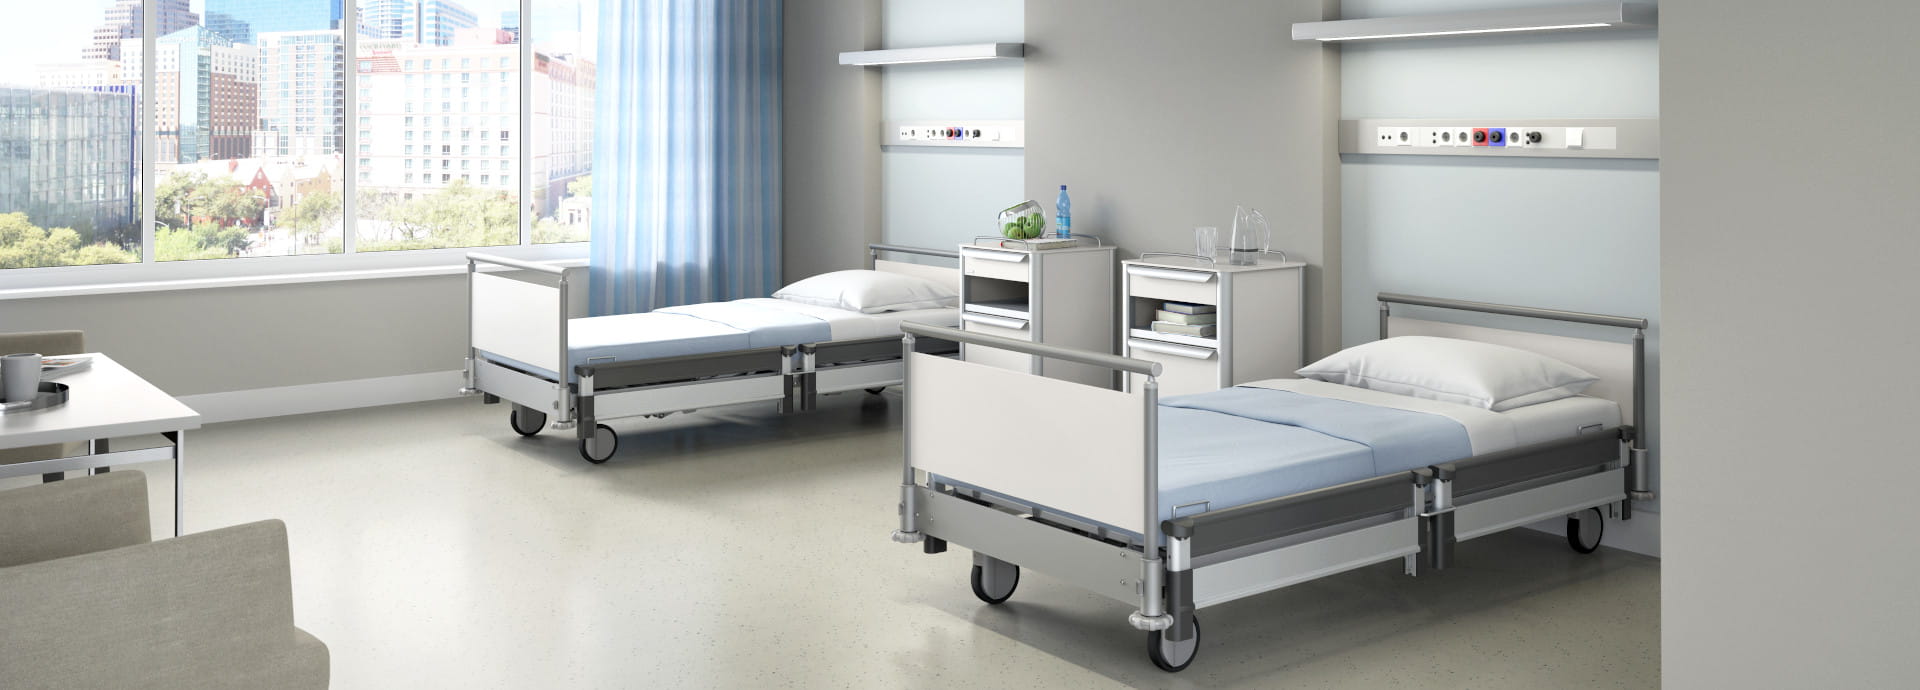 More than hospital bed: low height hospital bed + cozy design = hospitel